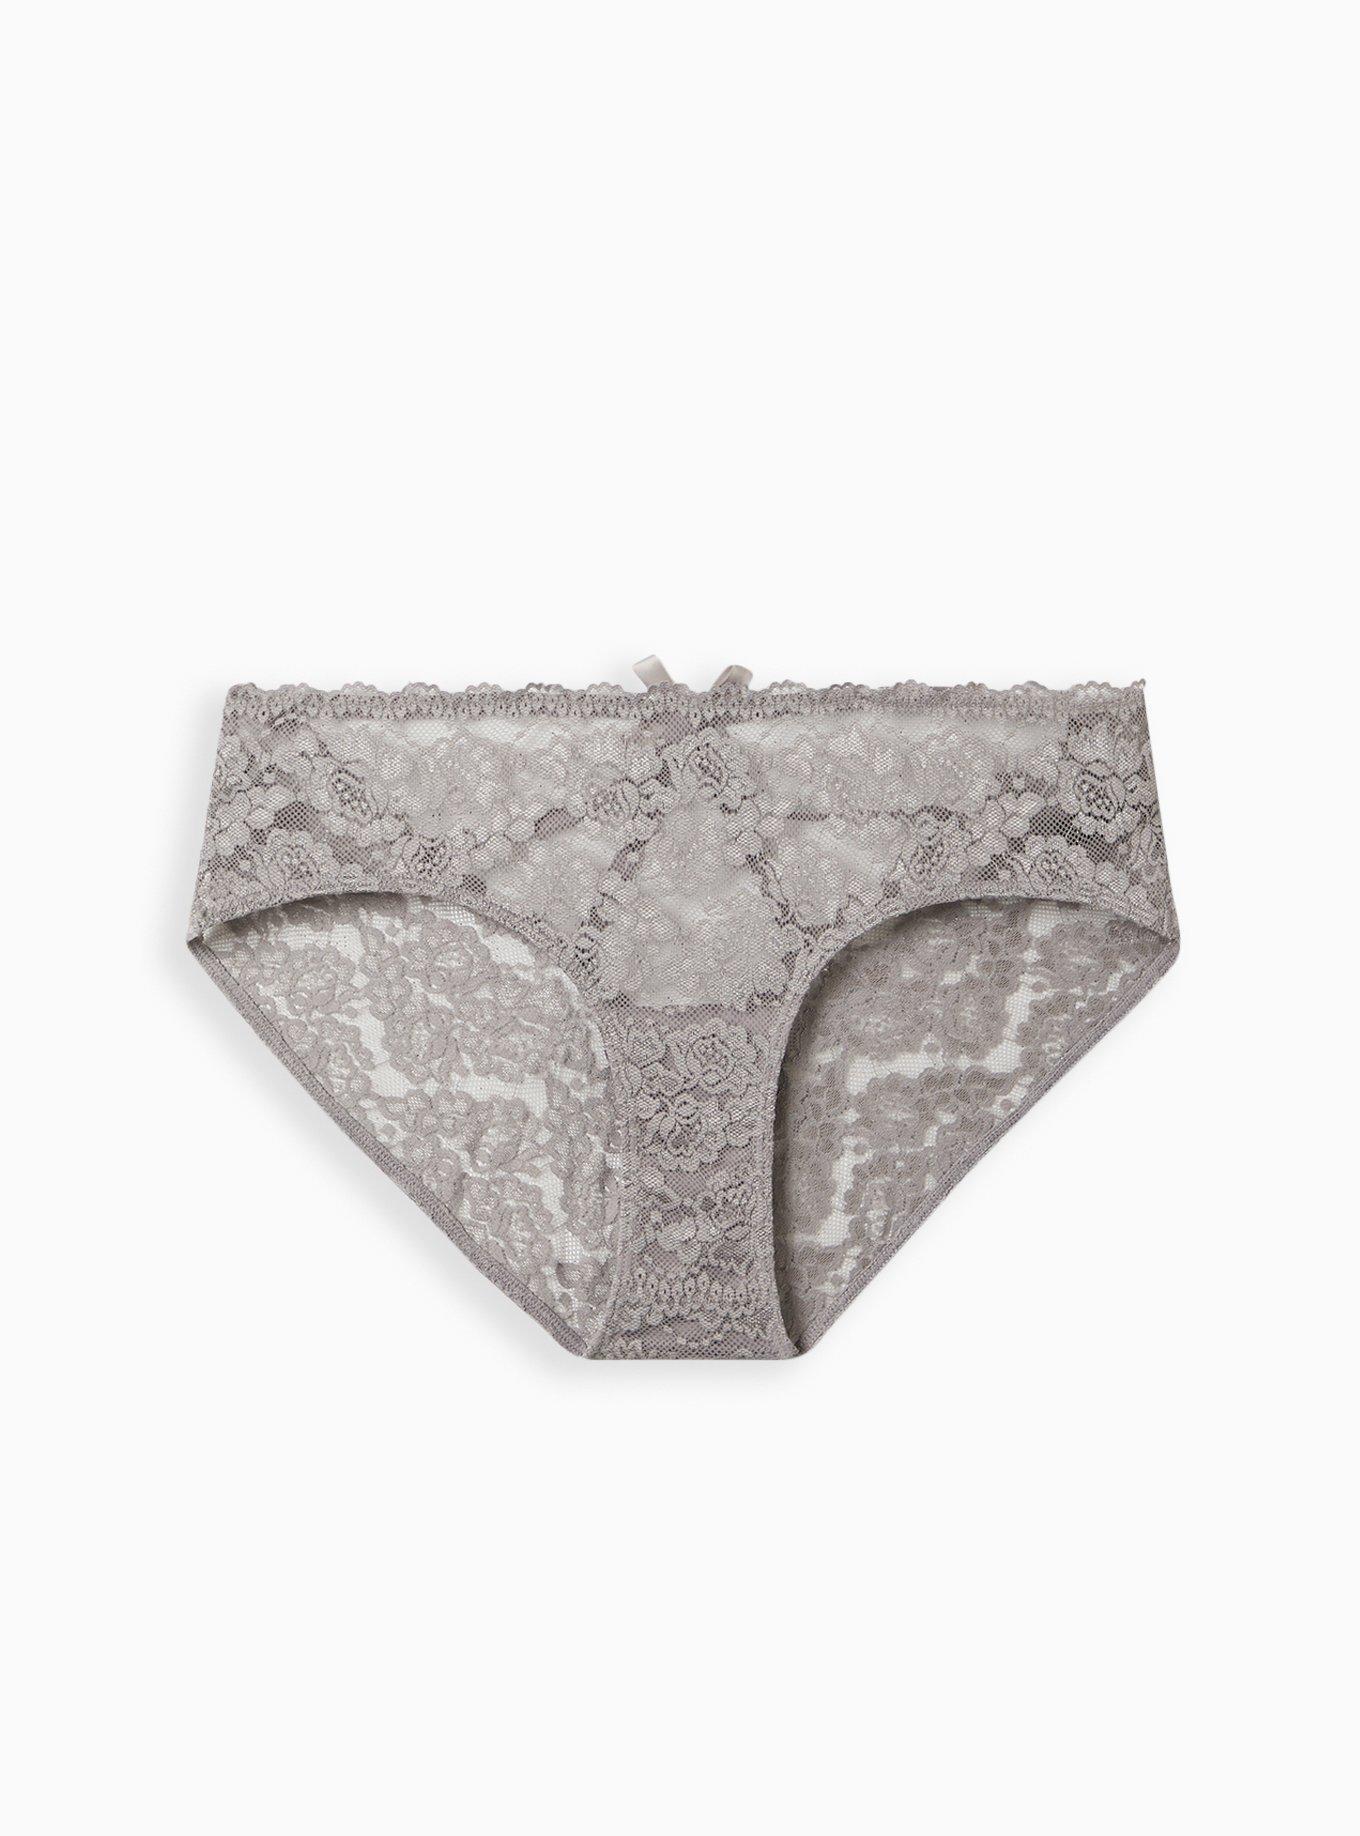 Plus Size - Cage Back Brief Panty - Lace & Microfiber Heather Grey - Torrid